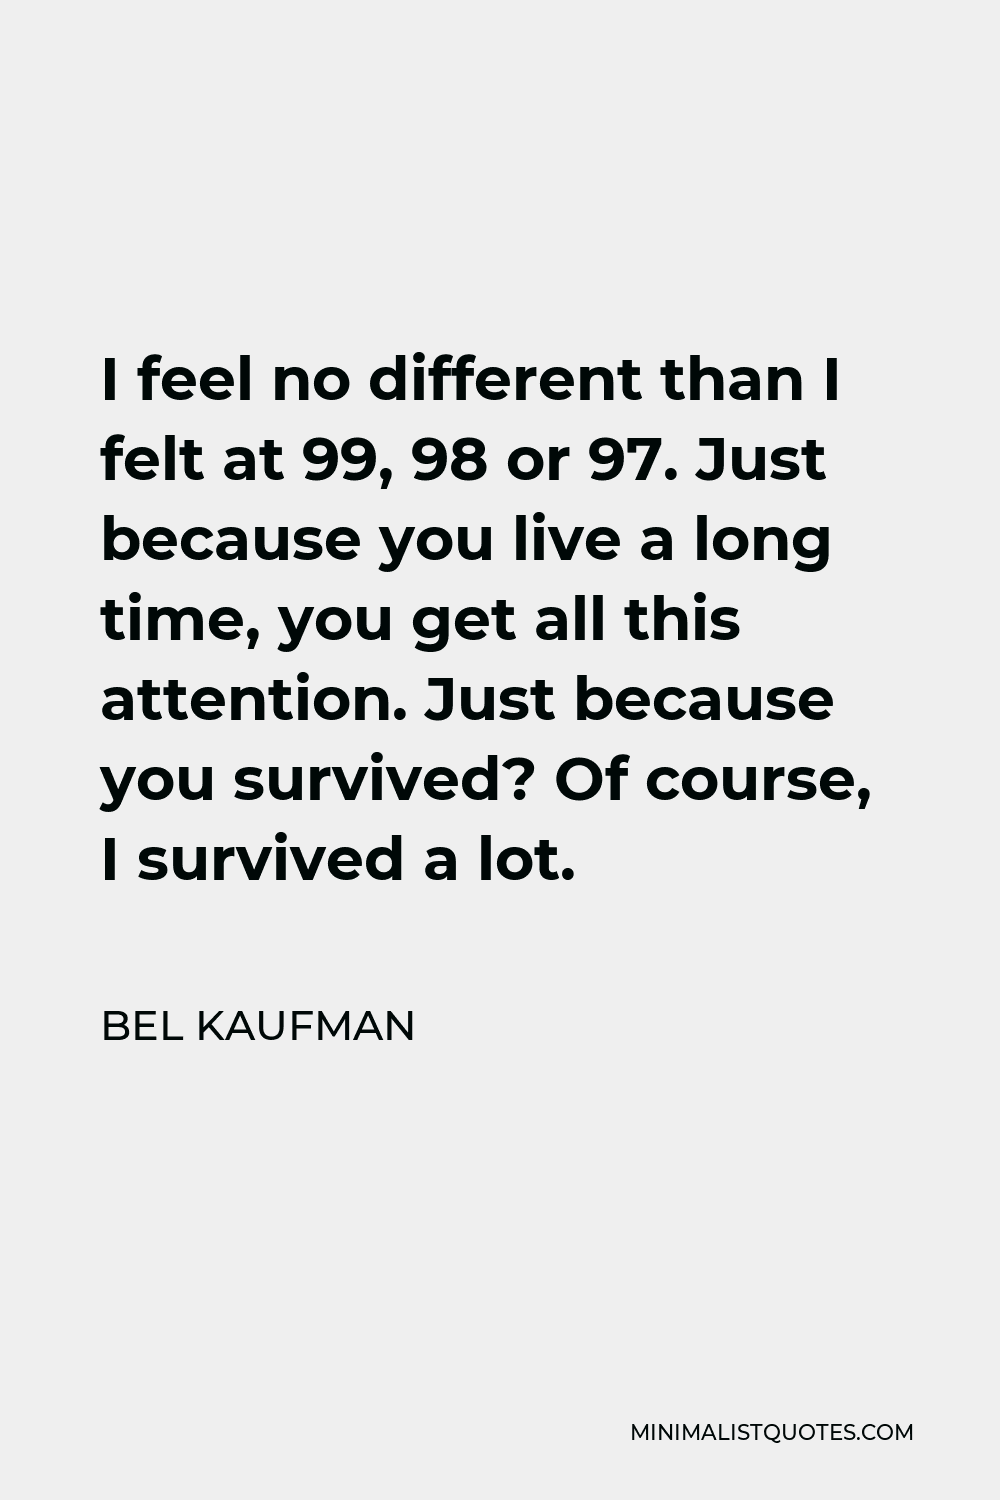 Bel Kaufman Quote - I feel no different than I felt at 99, 98 or 97. Just because you live a long time, you get all this attention. Just because you survived? Of course, I survived a lot.